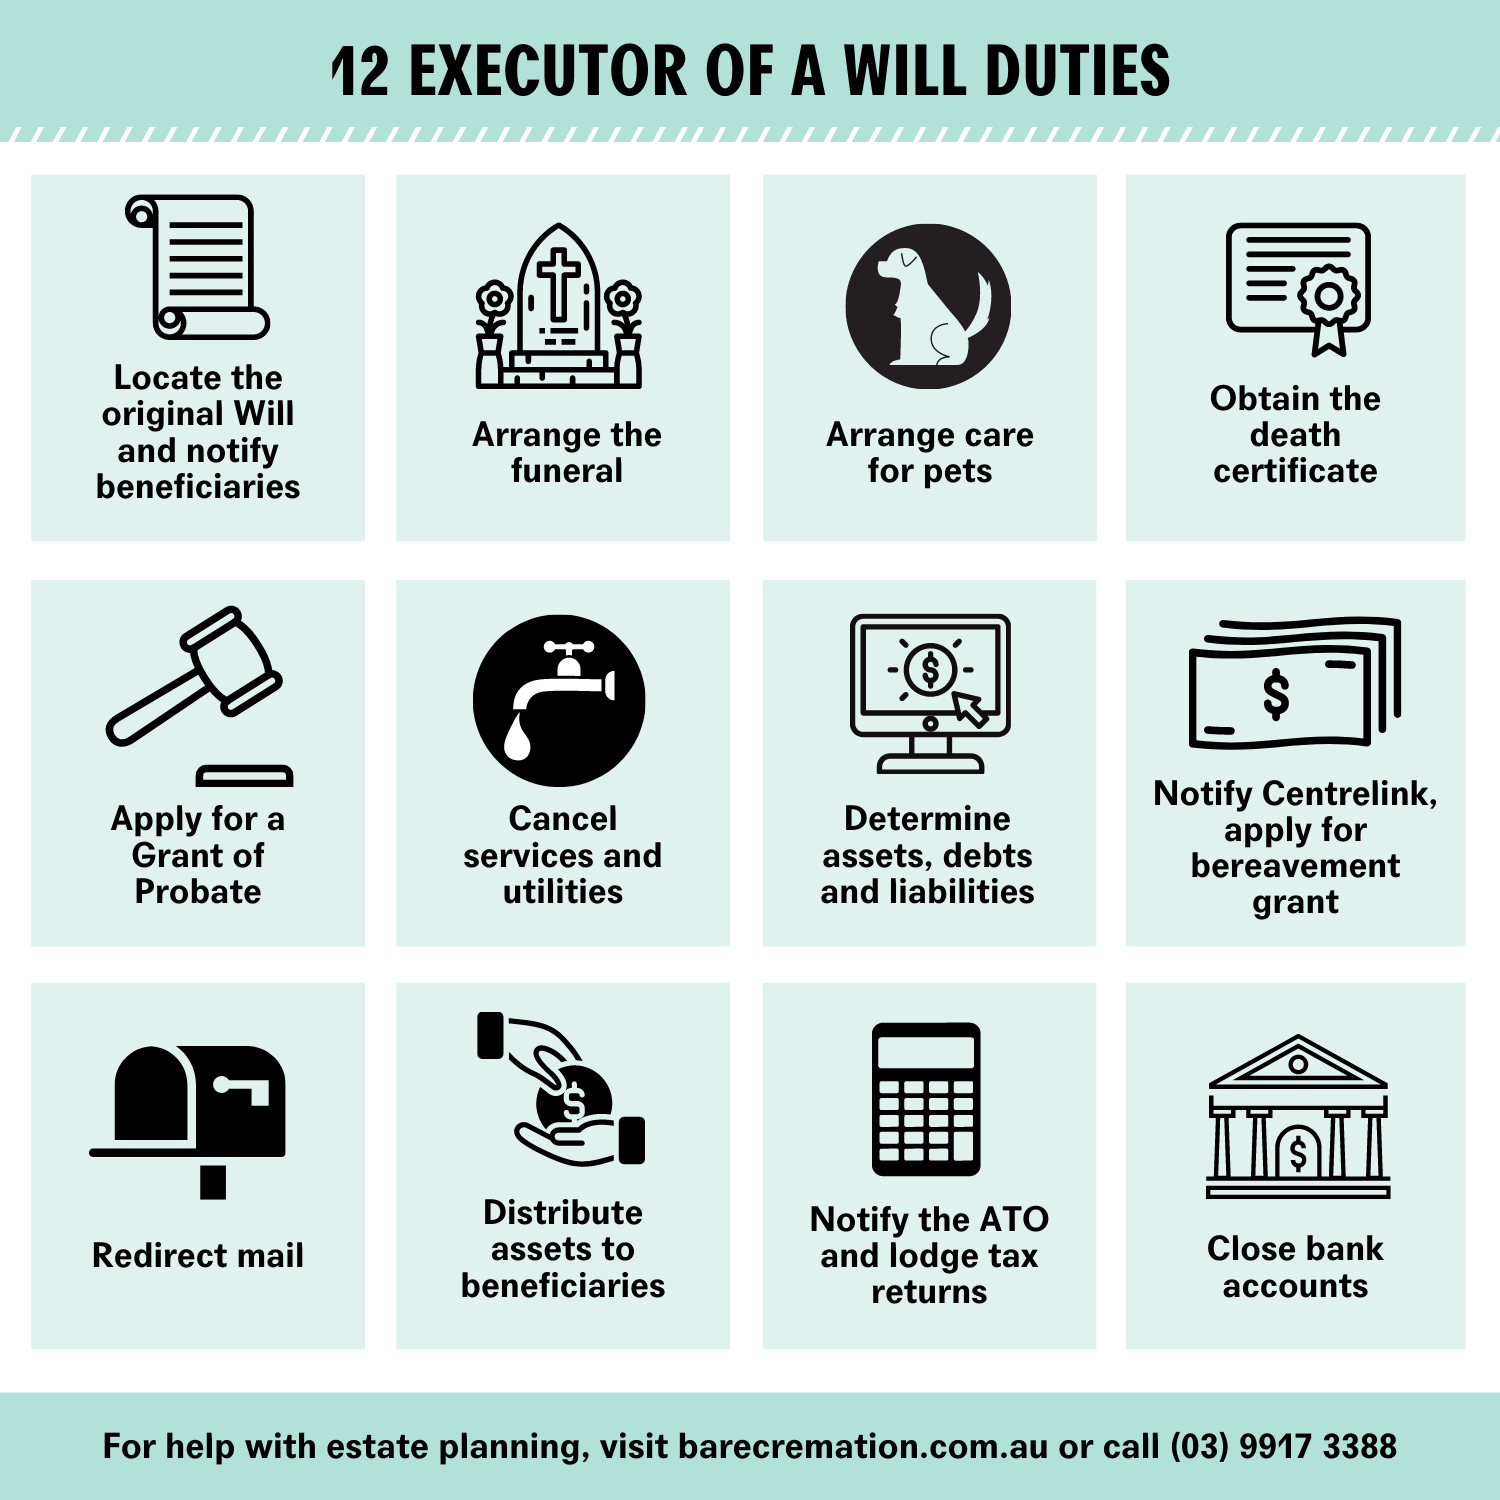 Here are 12 common executor of a Will duties.